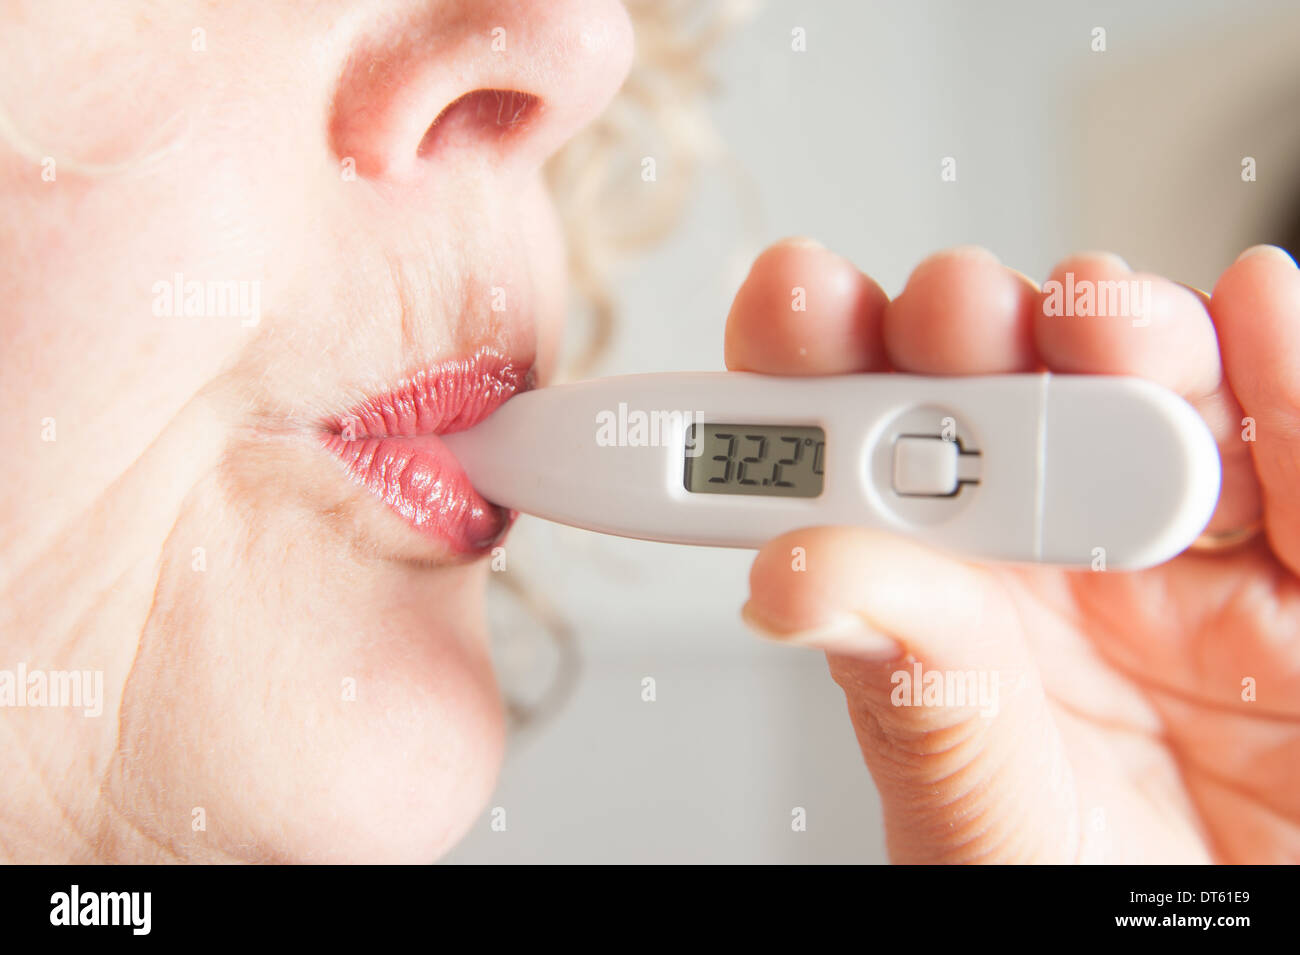 Woman taking her own temperature using digital thermometer Stock Photo